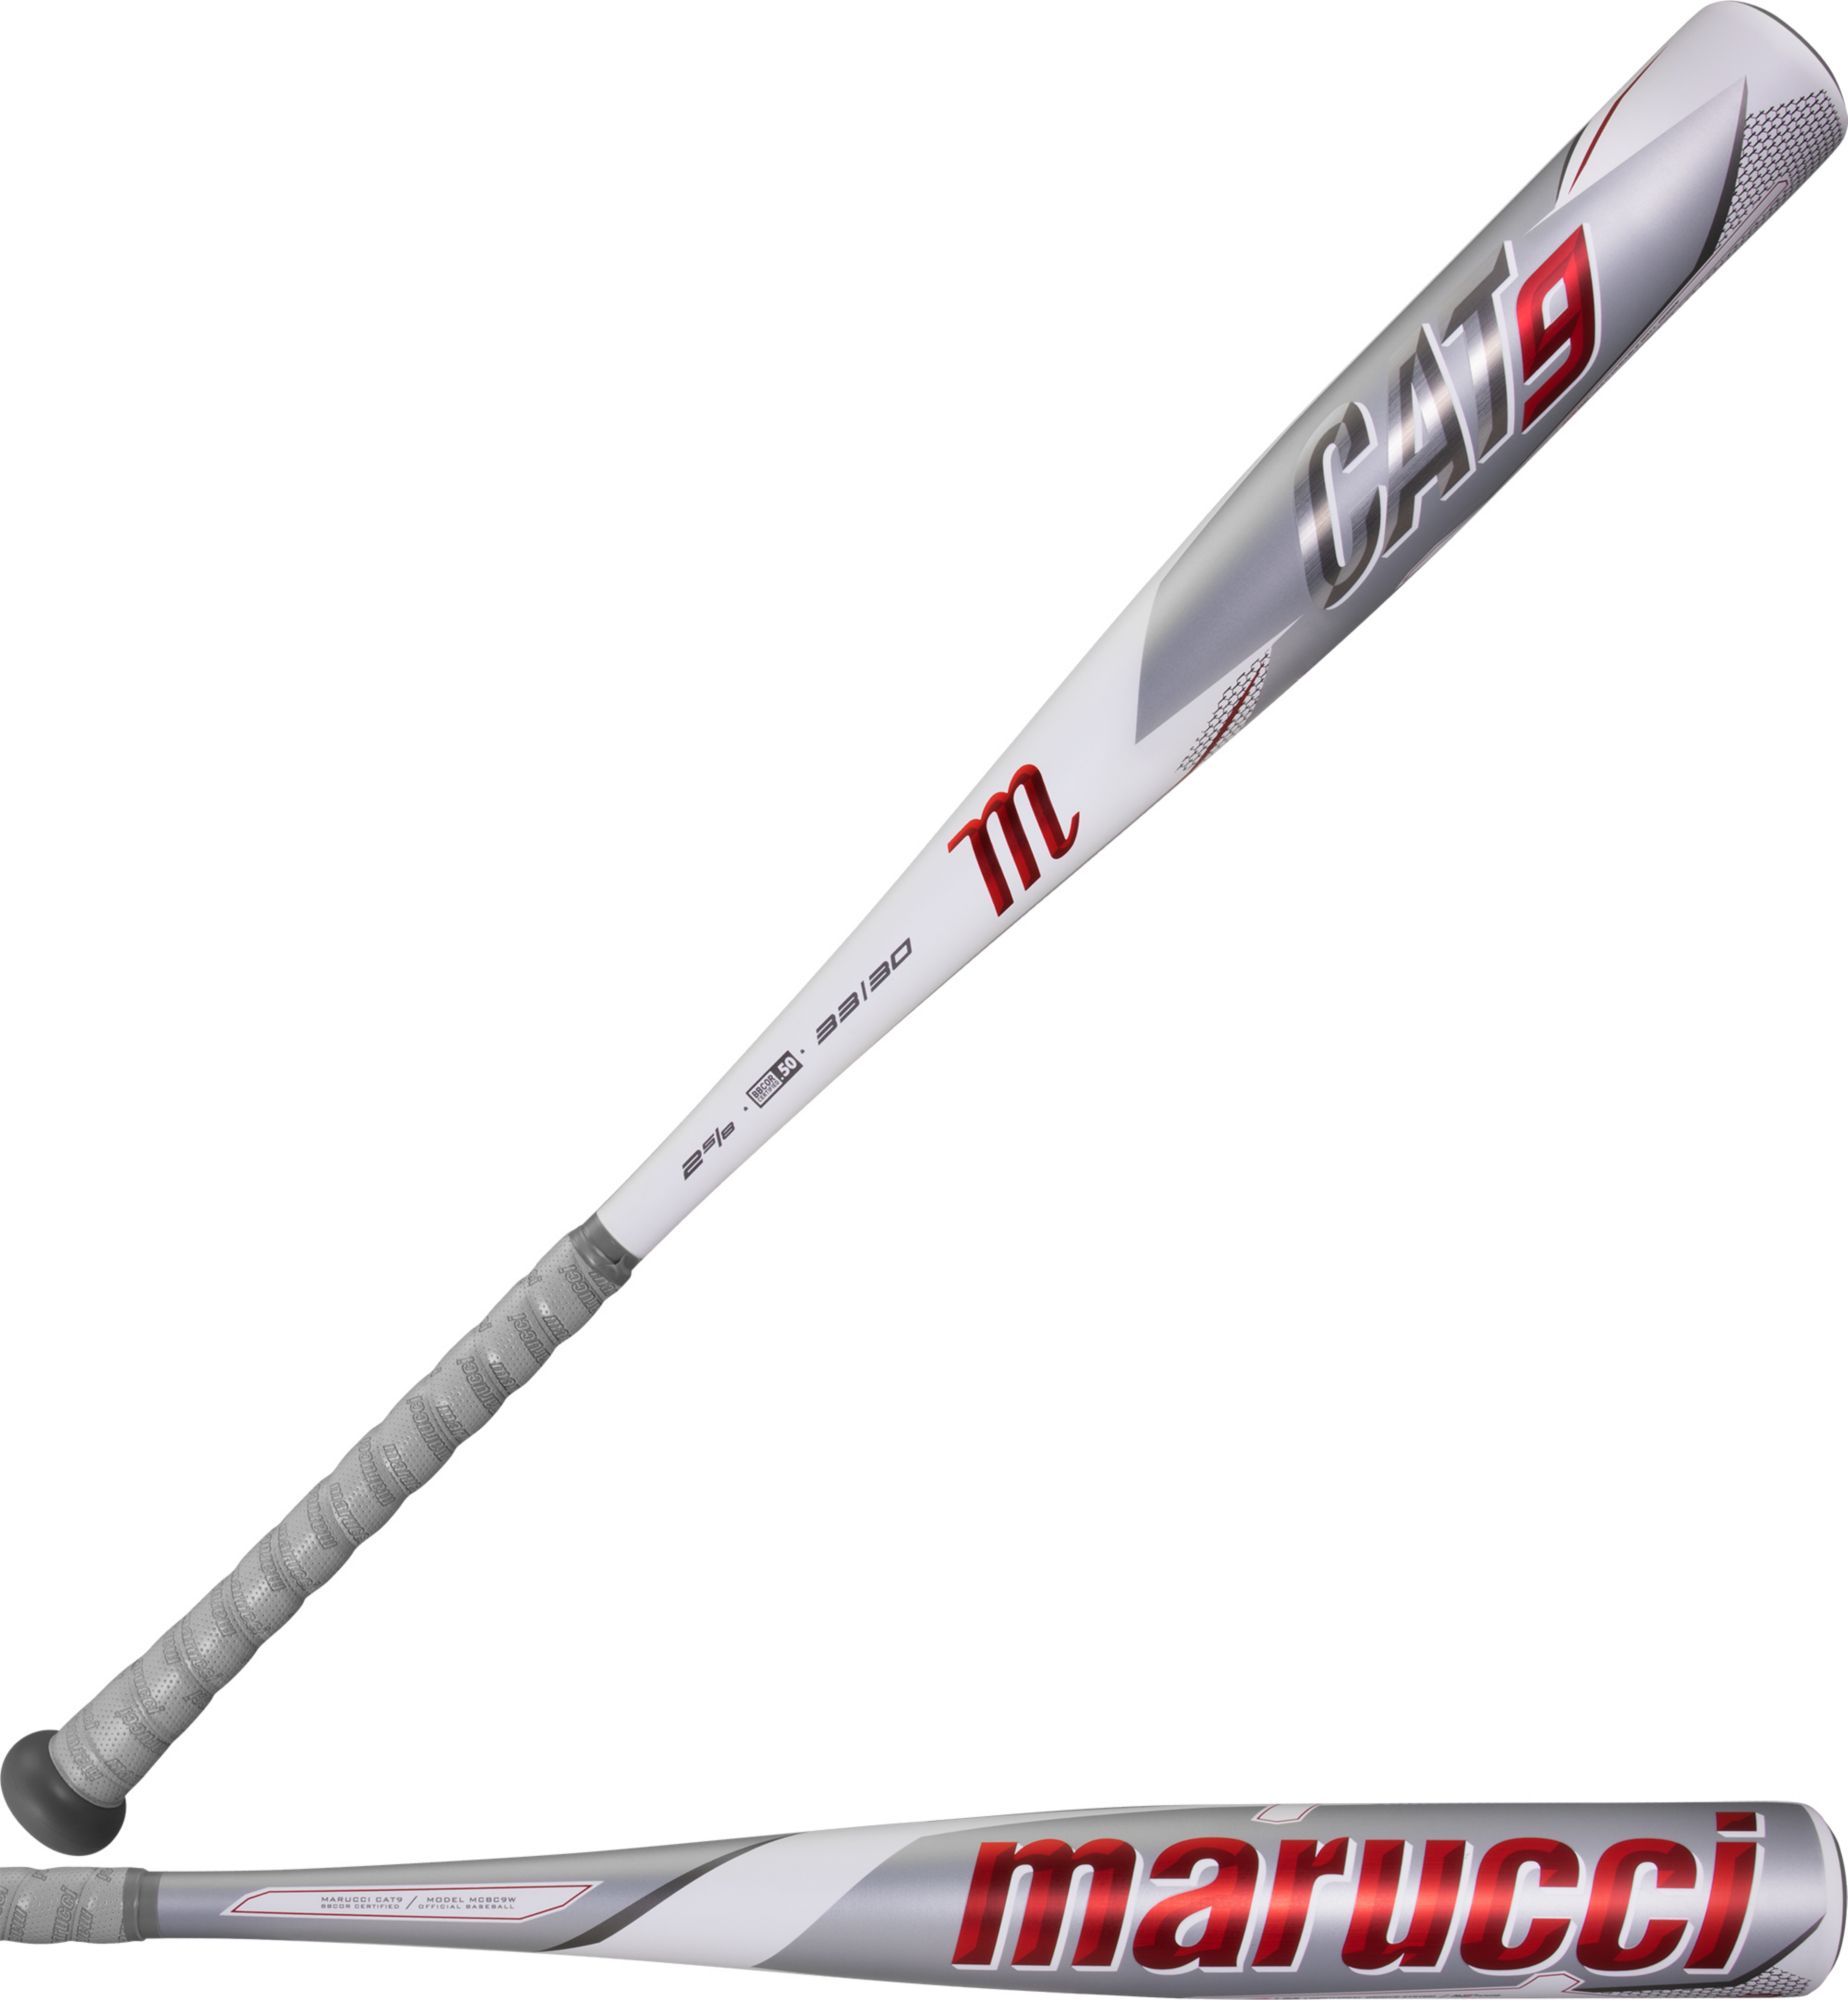 Marucci Cat9 Bats Curbside Pickup Available At Dick S